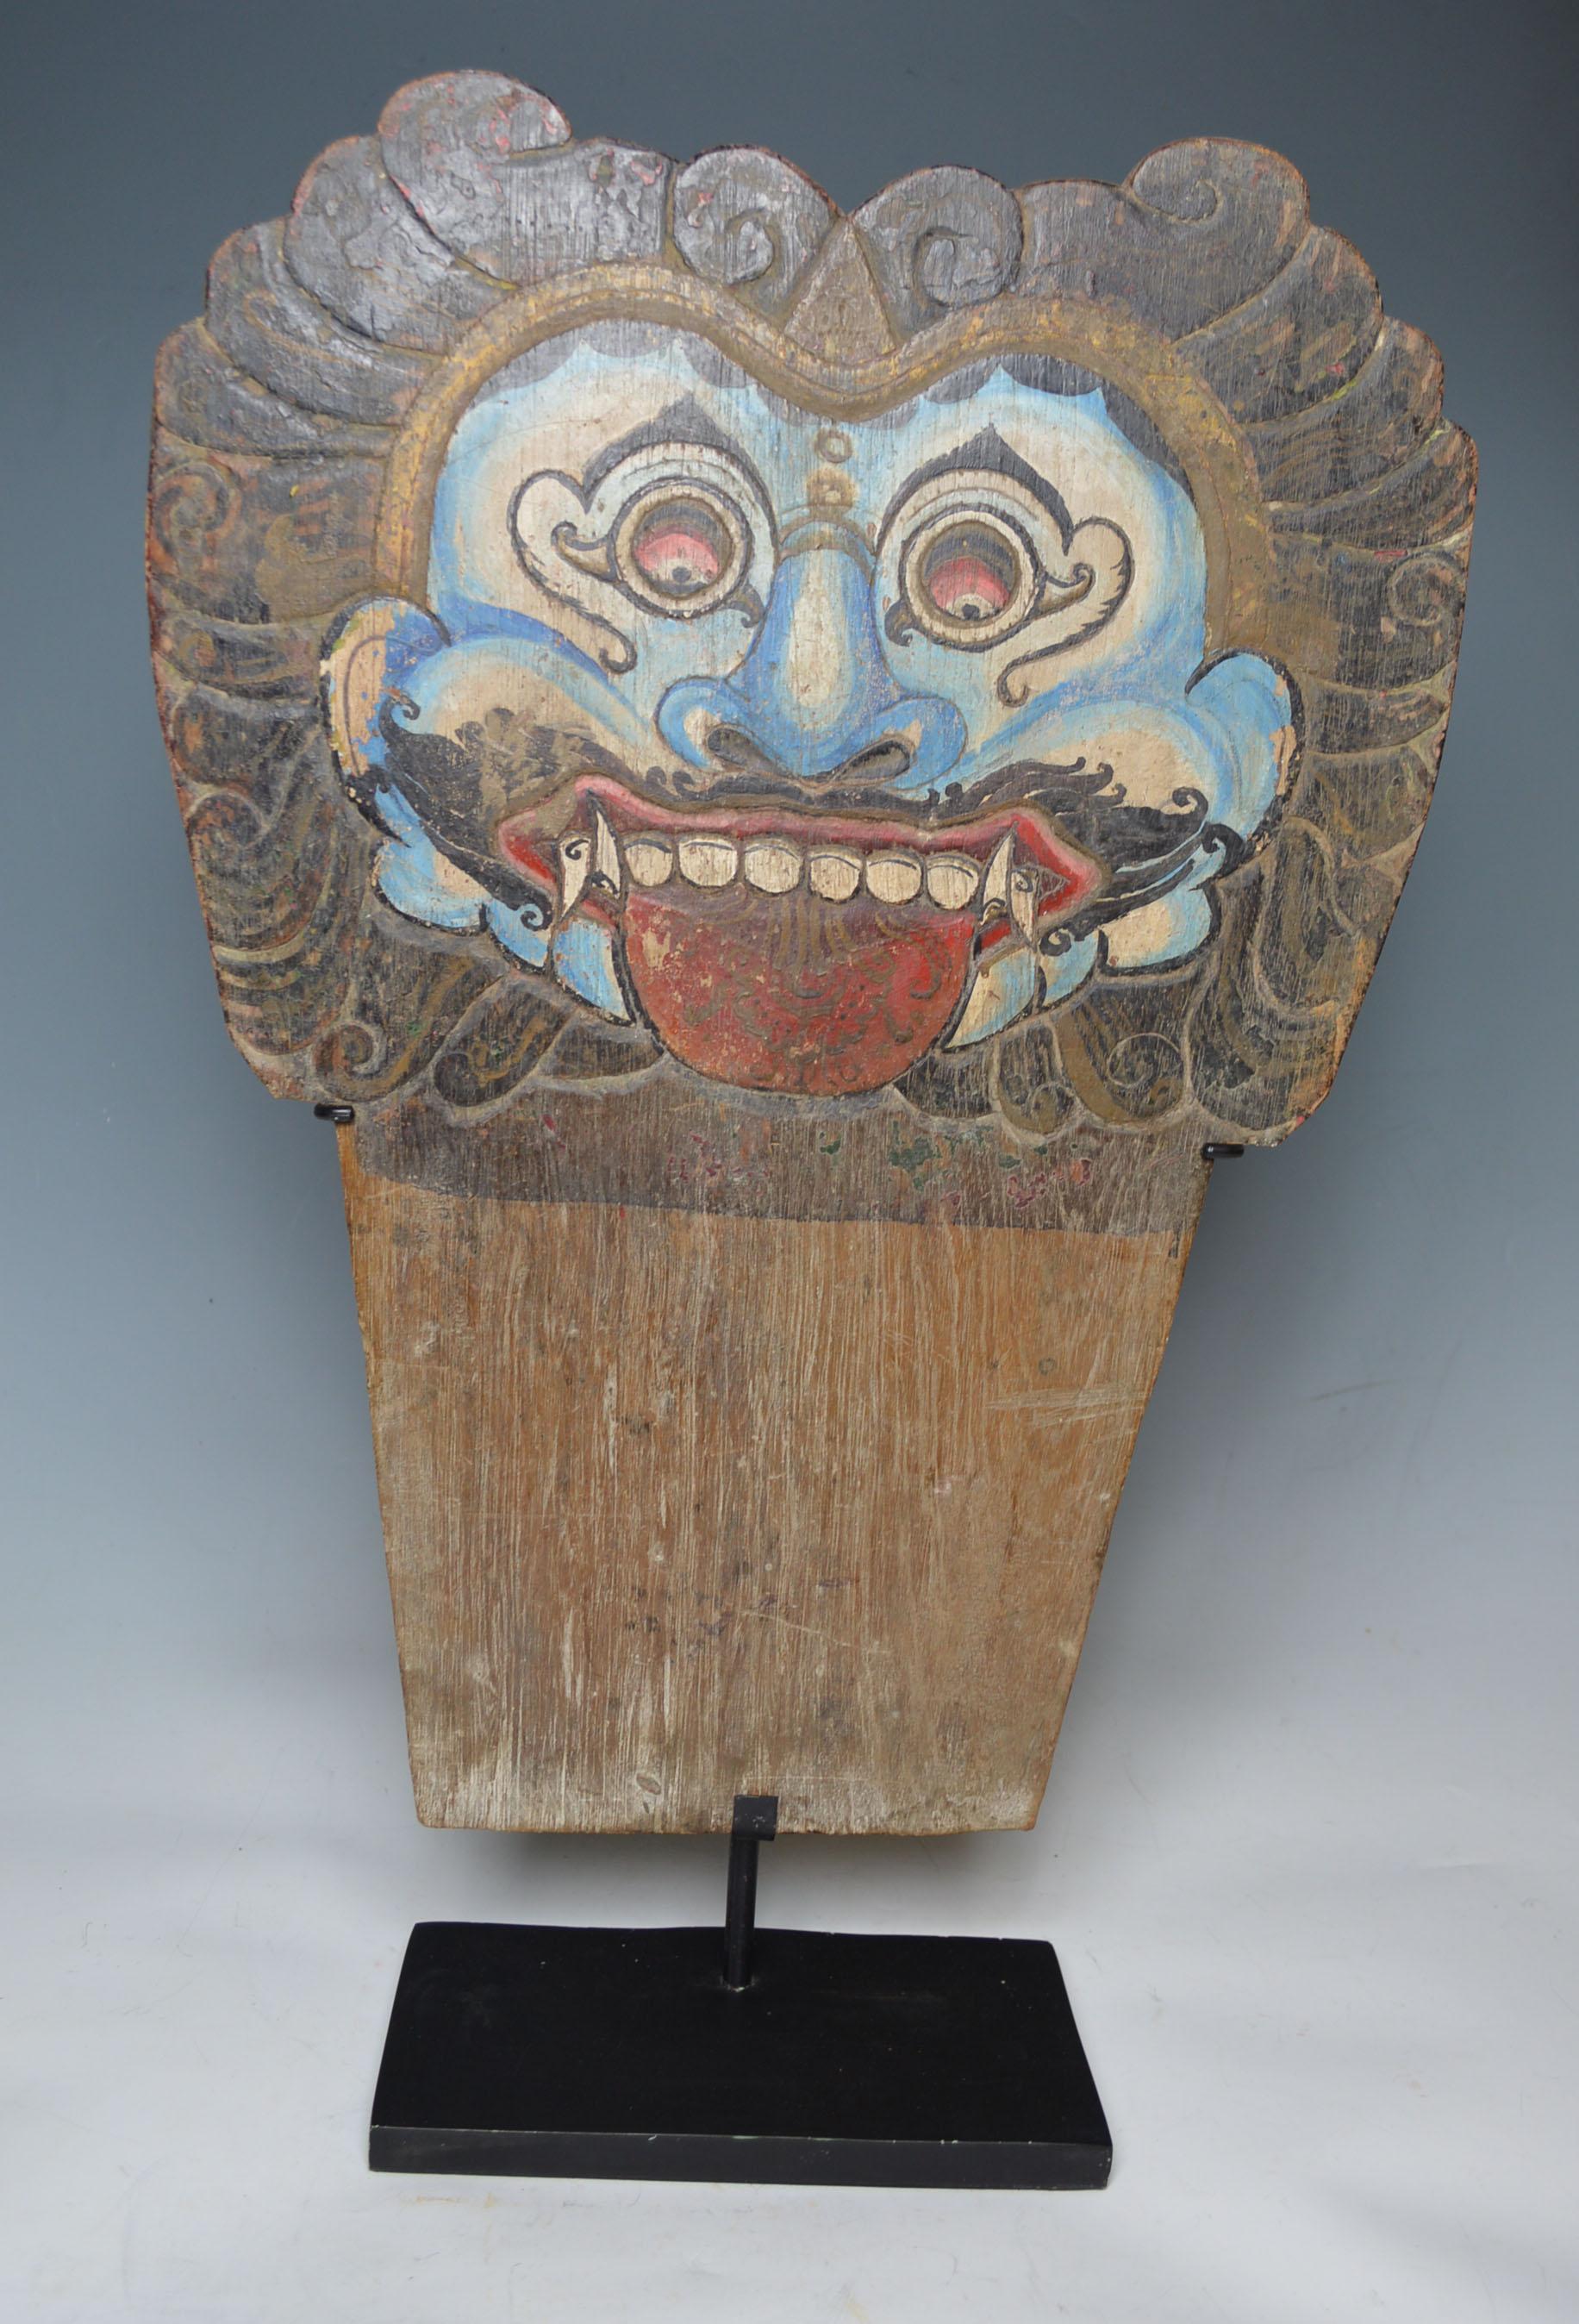 A fine Pair antique carved and painted wood panel of the Balinese demon queen Rangda, 
Part of a processional Barong Dance costume
Used during Barong dances and ceremonies celebrating the battle between Rangda and Barong which roughly equates to